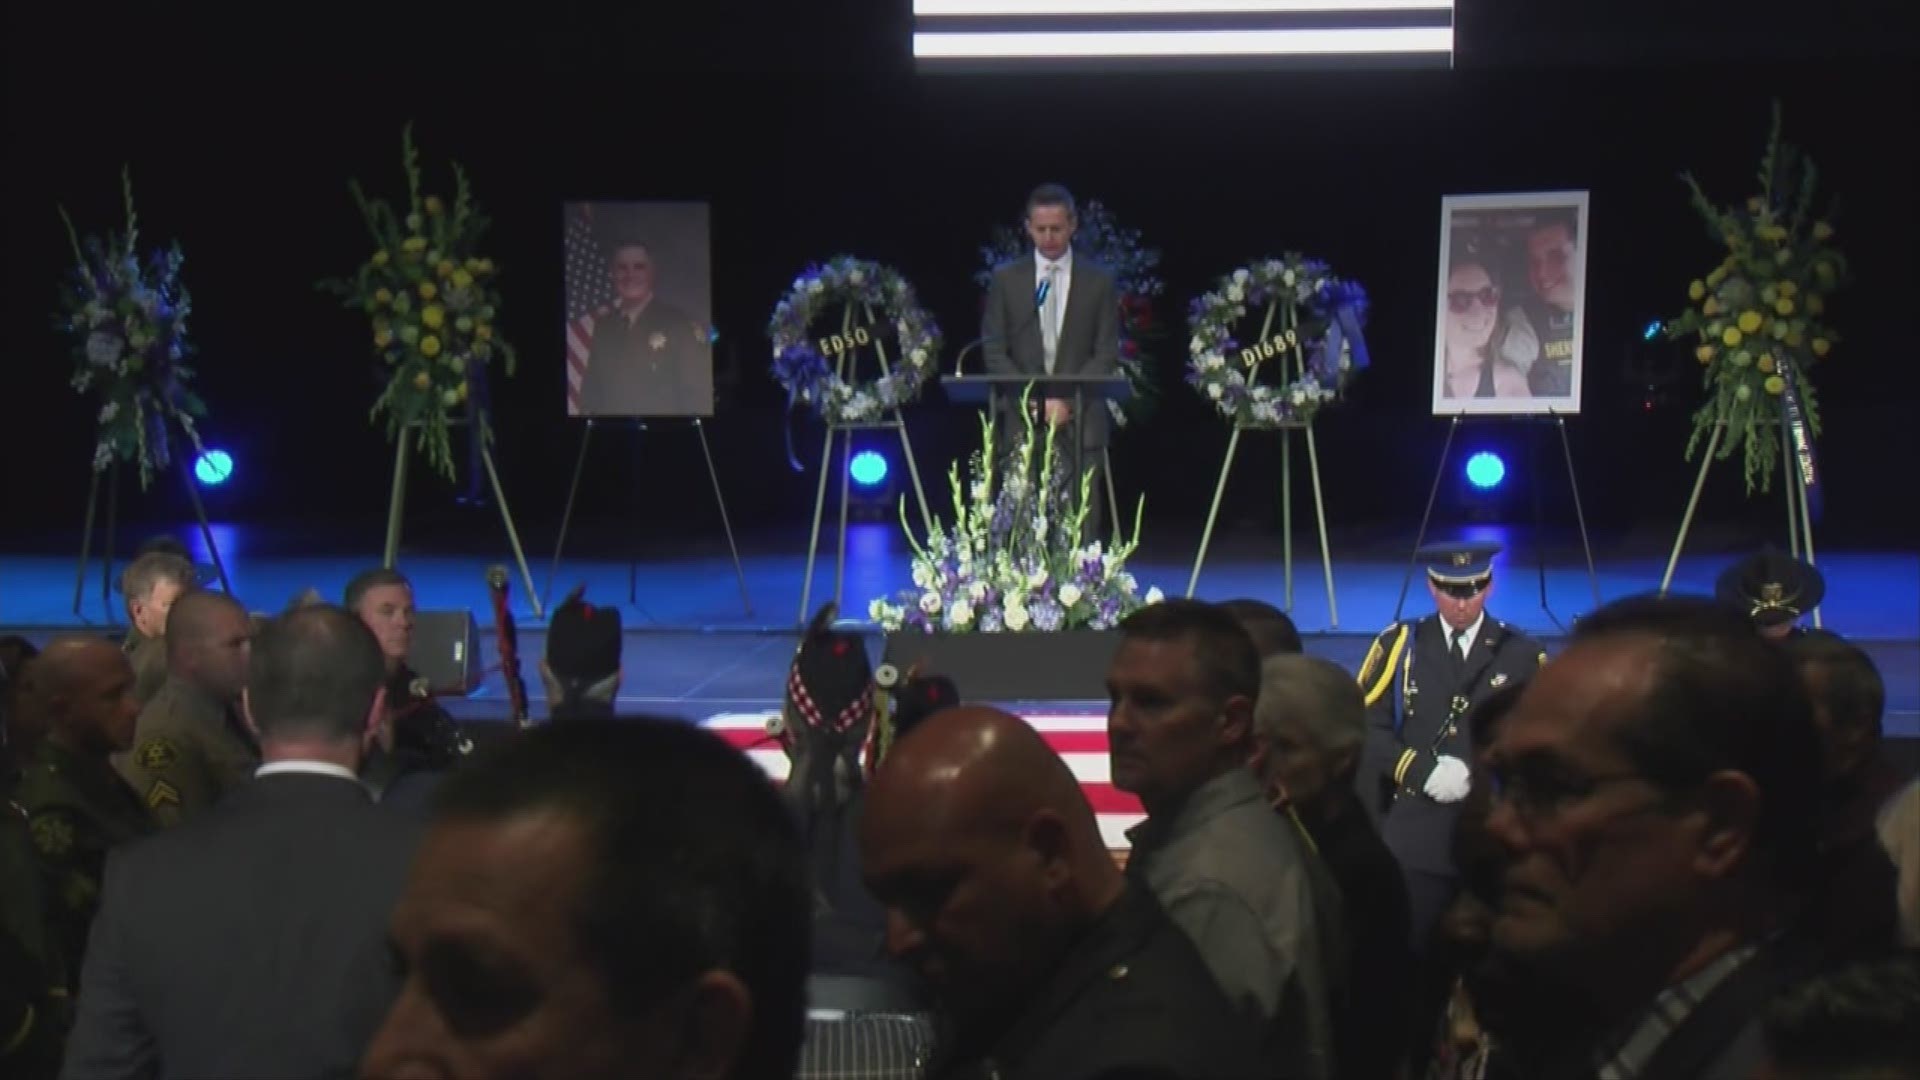 A pastor reads the words written by the wife of fallen El Dorado County Sheriff's Deputy Brian Ishmael at his memorial service.